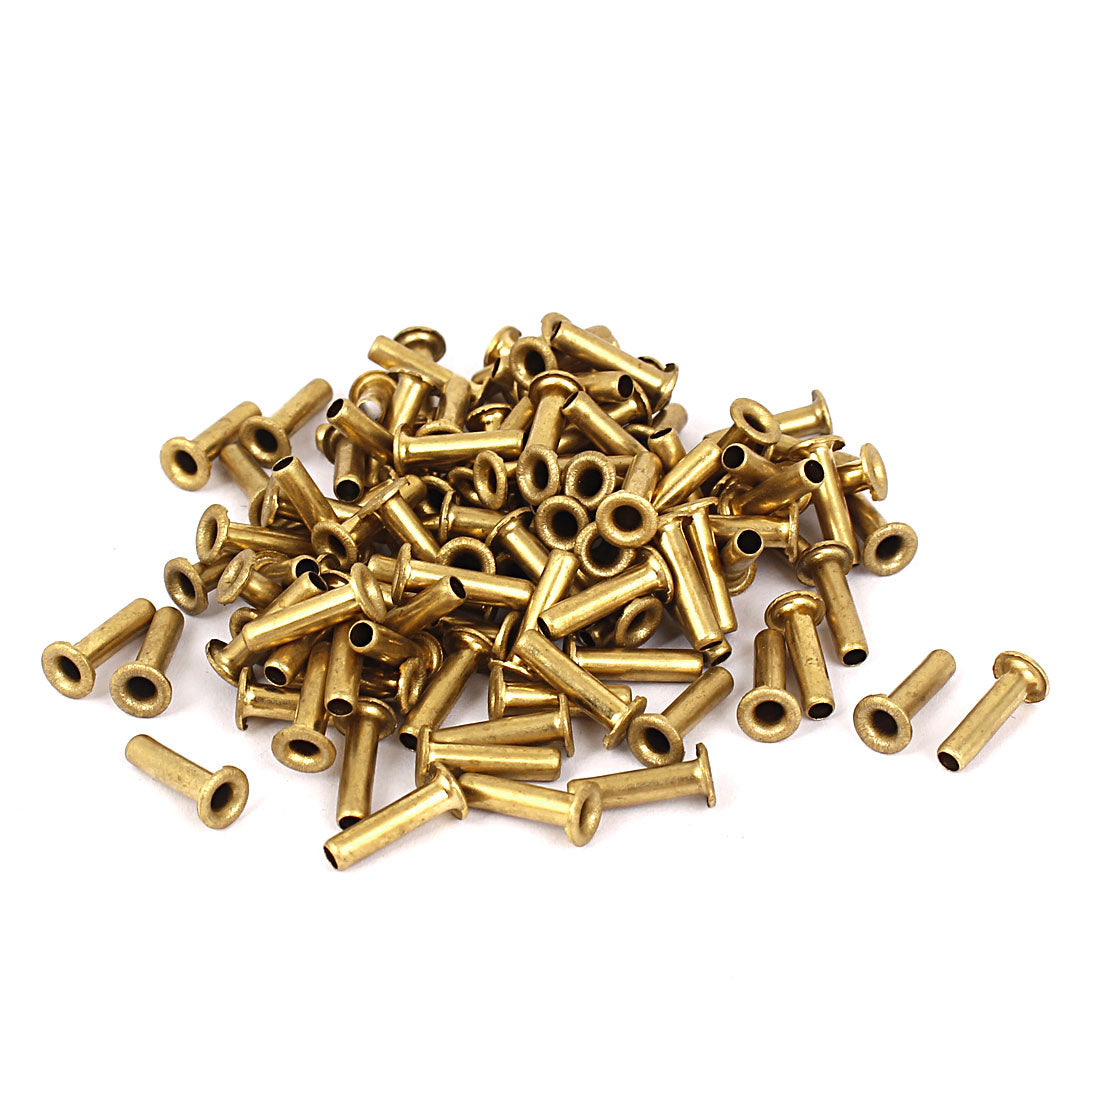 uxcell Uxcell 3mm x 12mm Double Sided Brass Hollow Rivets Grommets Tool 100 Pcs